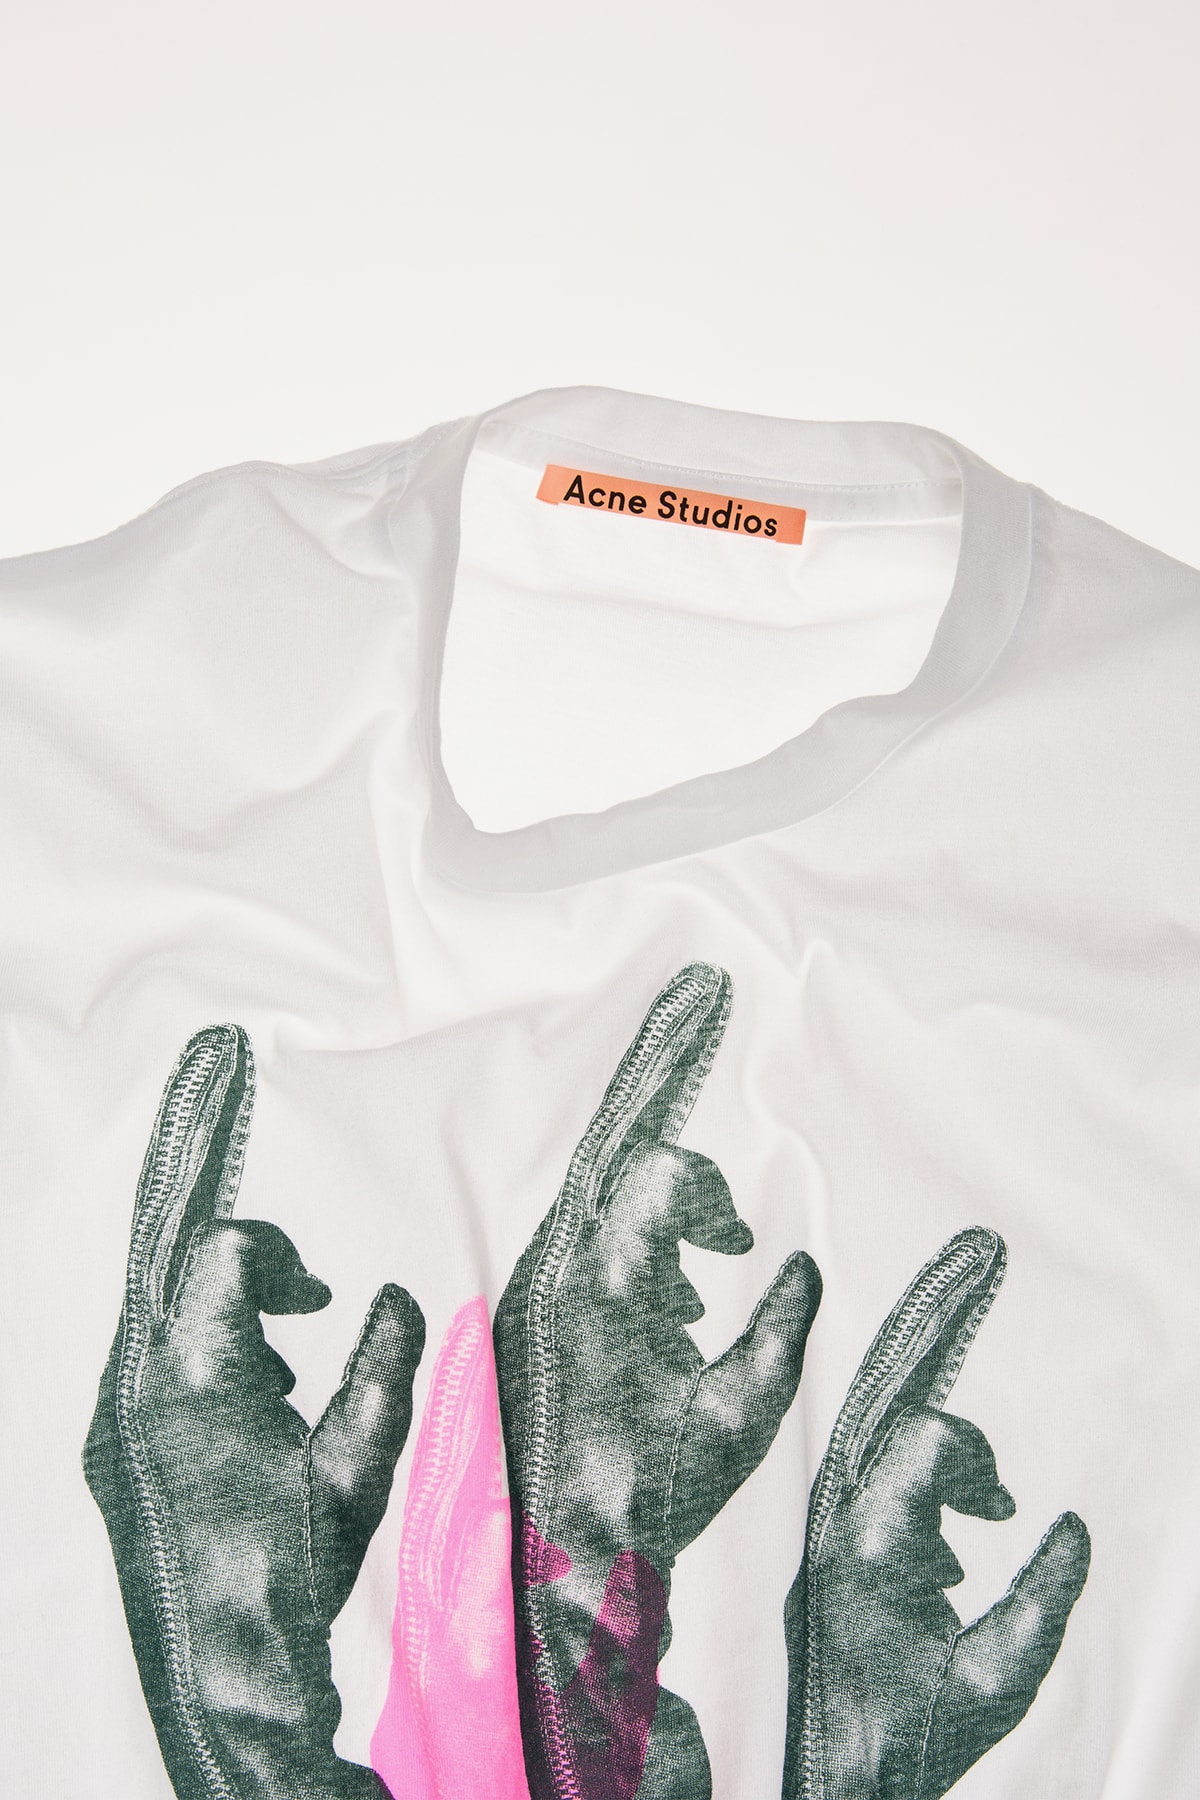 Acne Studios special editon tee shirt capsule graphic fall winter 2018 collection capsule middle finger april 26